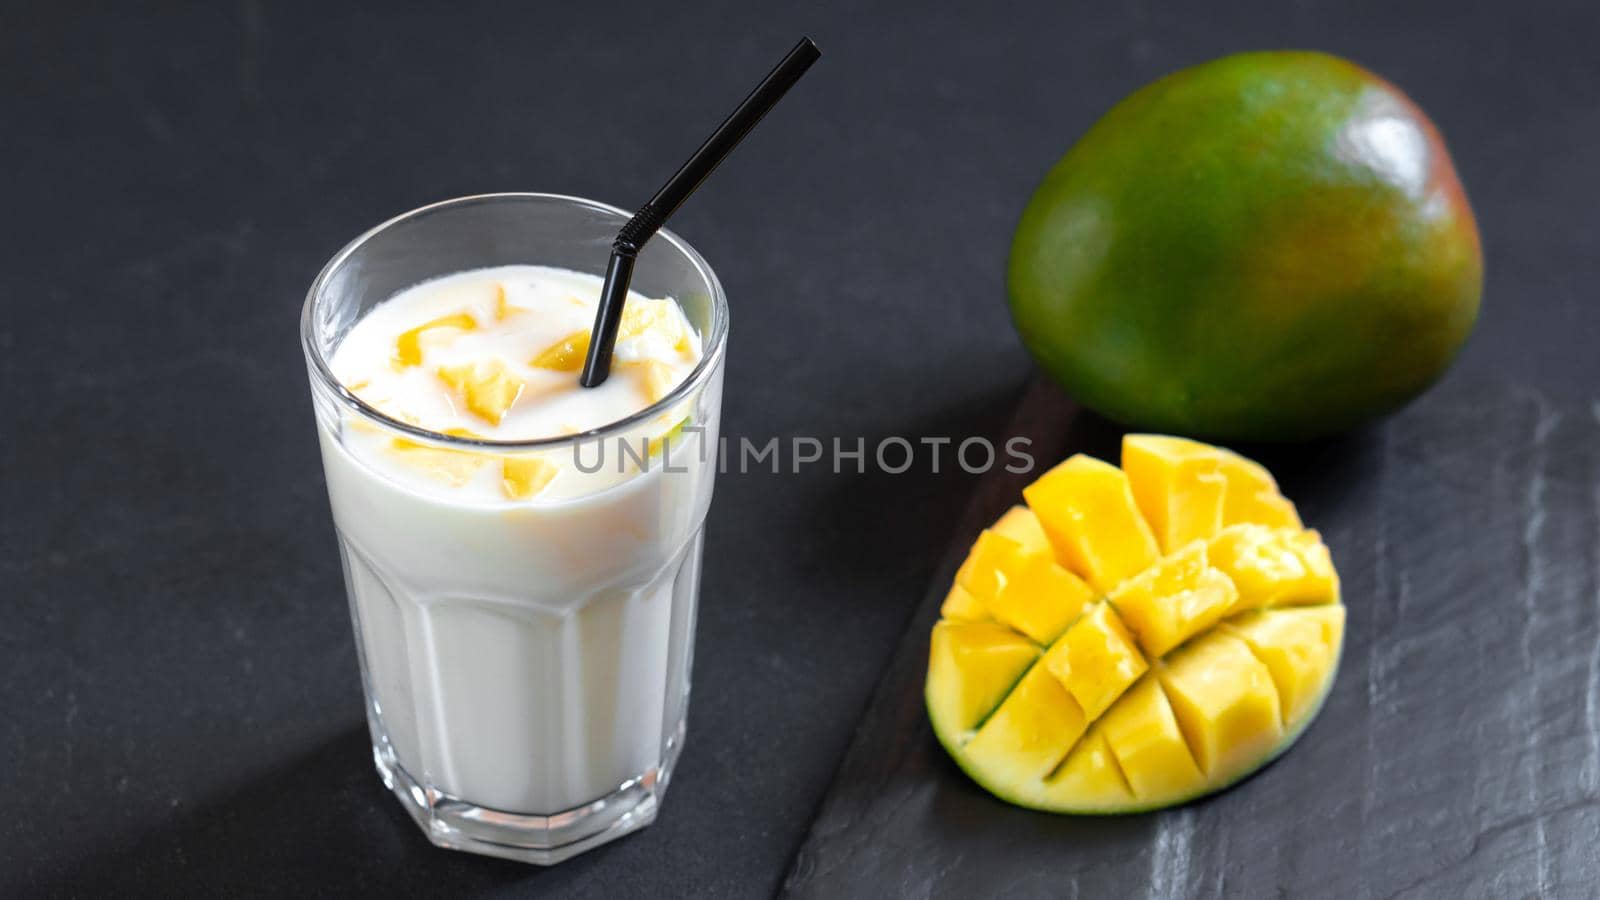 Milk drink on black background with mango. A classic mango milkshake - Lassi. A traditional drink in India from the heat. Top view. Cool mango milkshake on a black background. A drink to quench your thirst in the summer. Indian cuisine classic drink - Lassi. Milk, yogurt with mango chunks